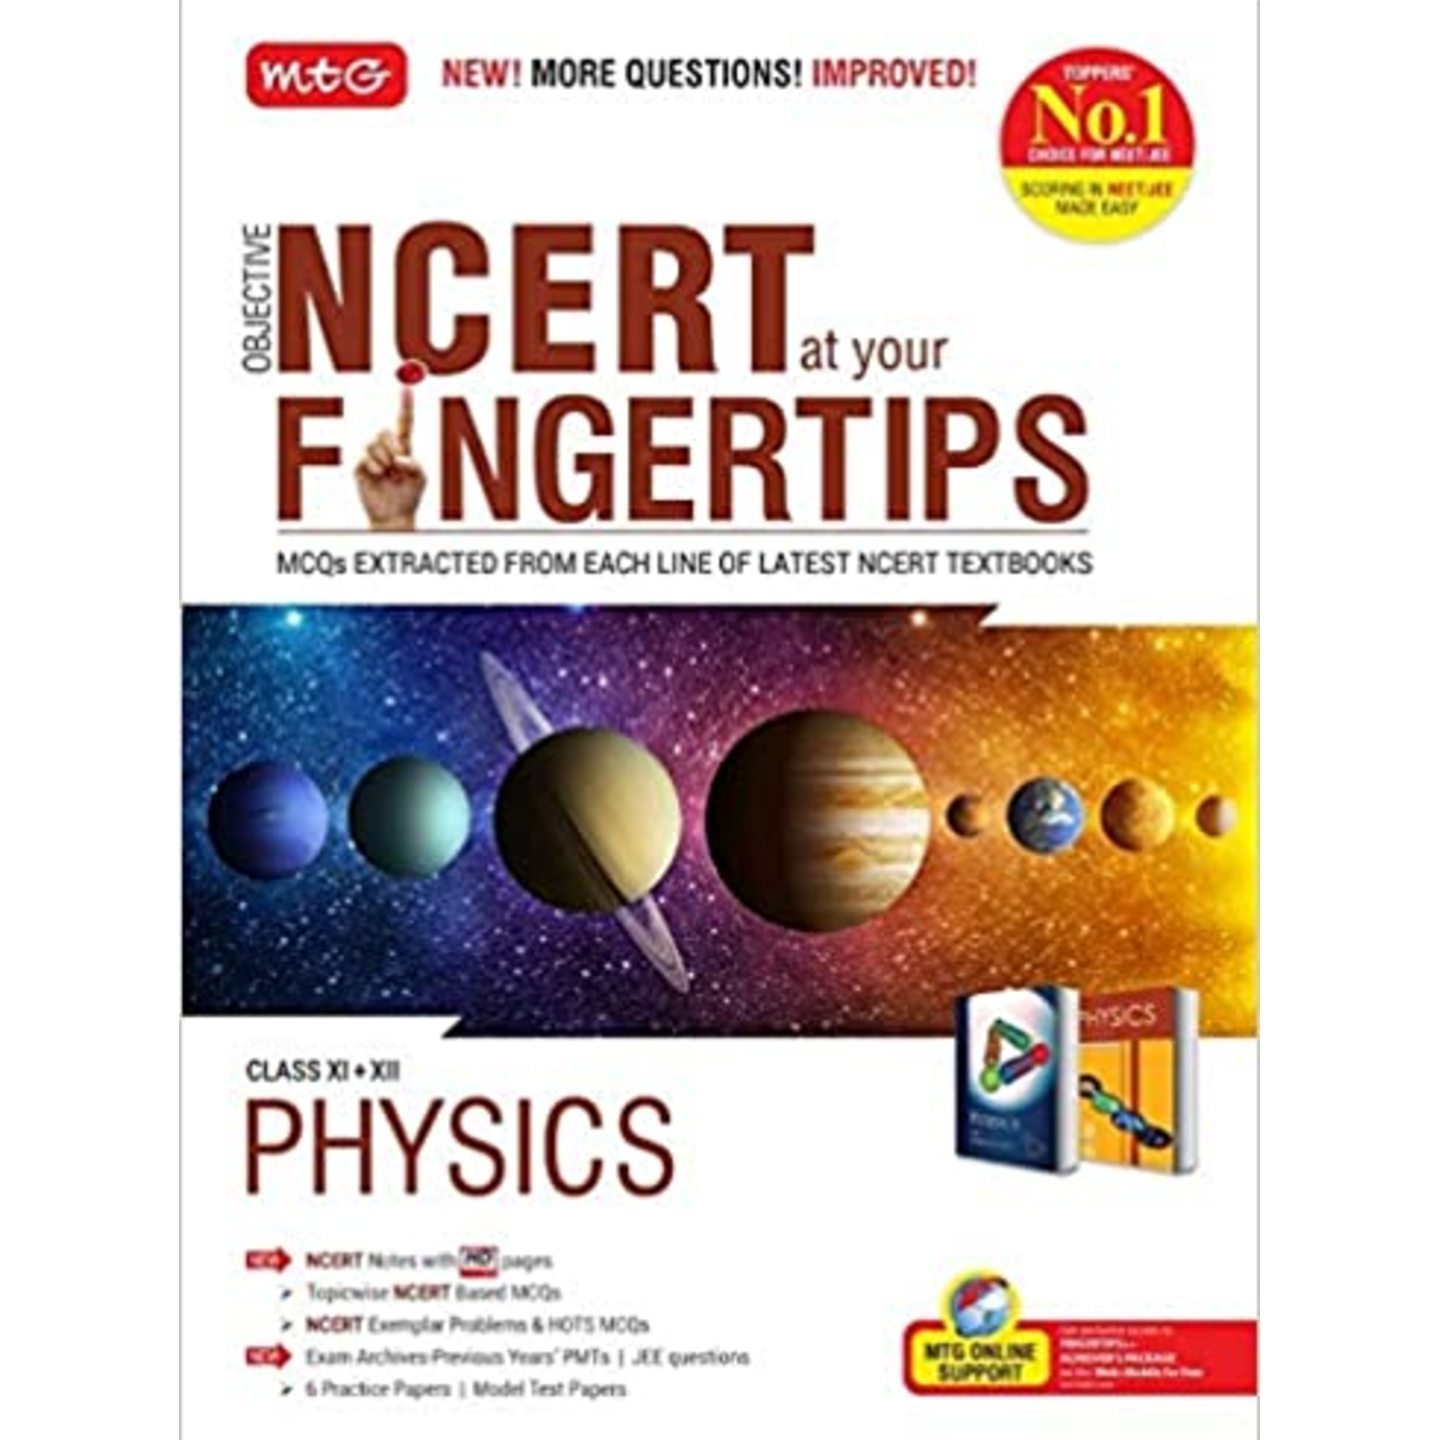 MTG Objective NCERT at your FINGERTIPS for NEET-AIIMS - Physics